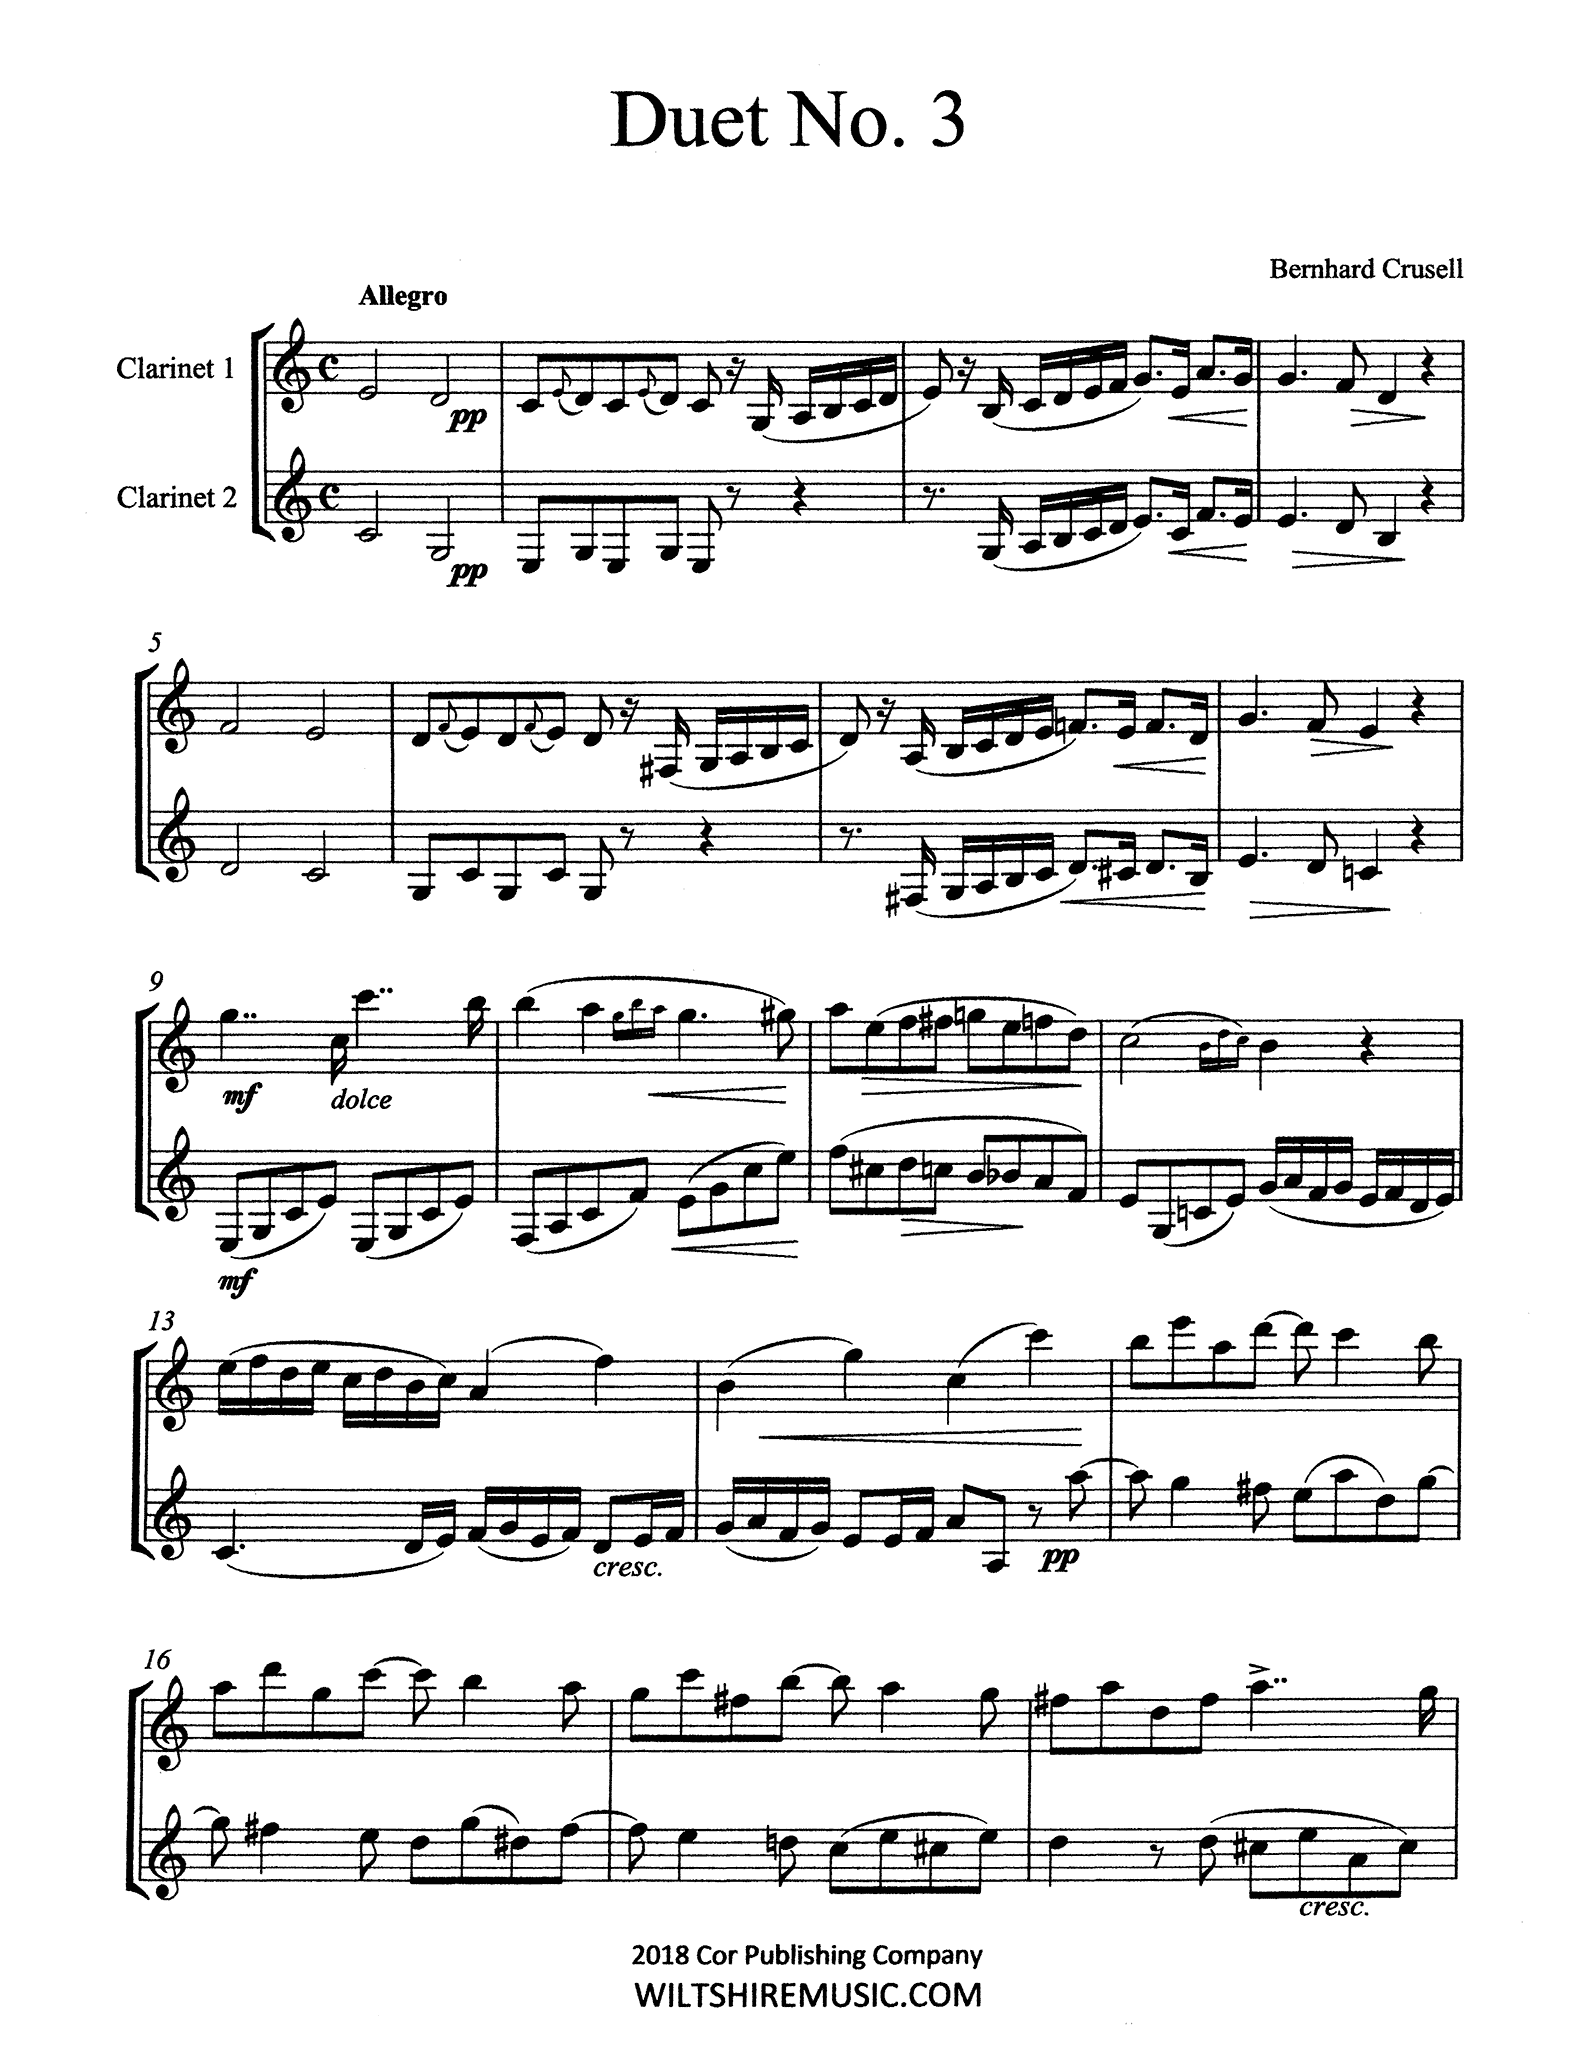 Crusell Clarinet Duet No. 3 in C Major: I. Allegro page 1